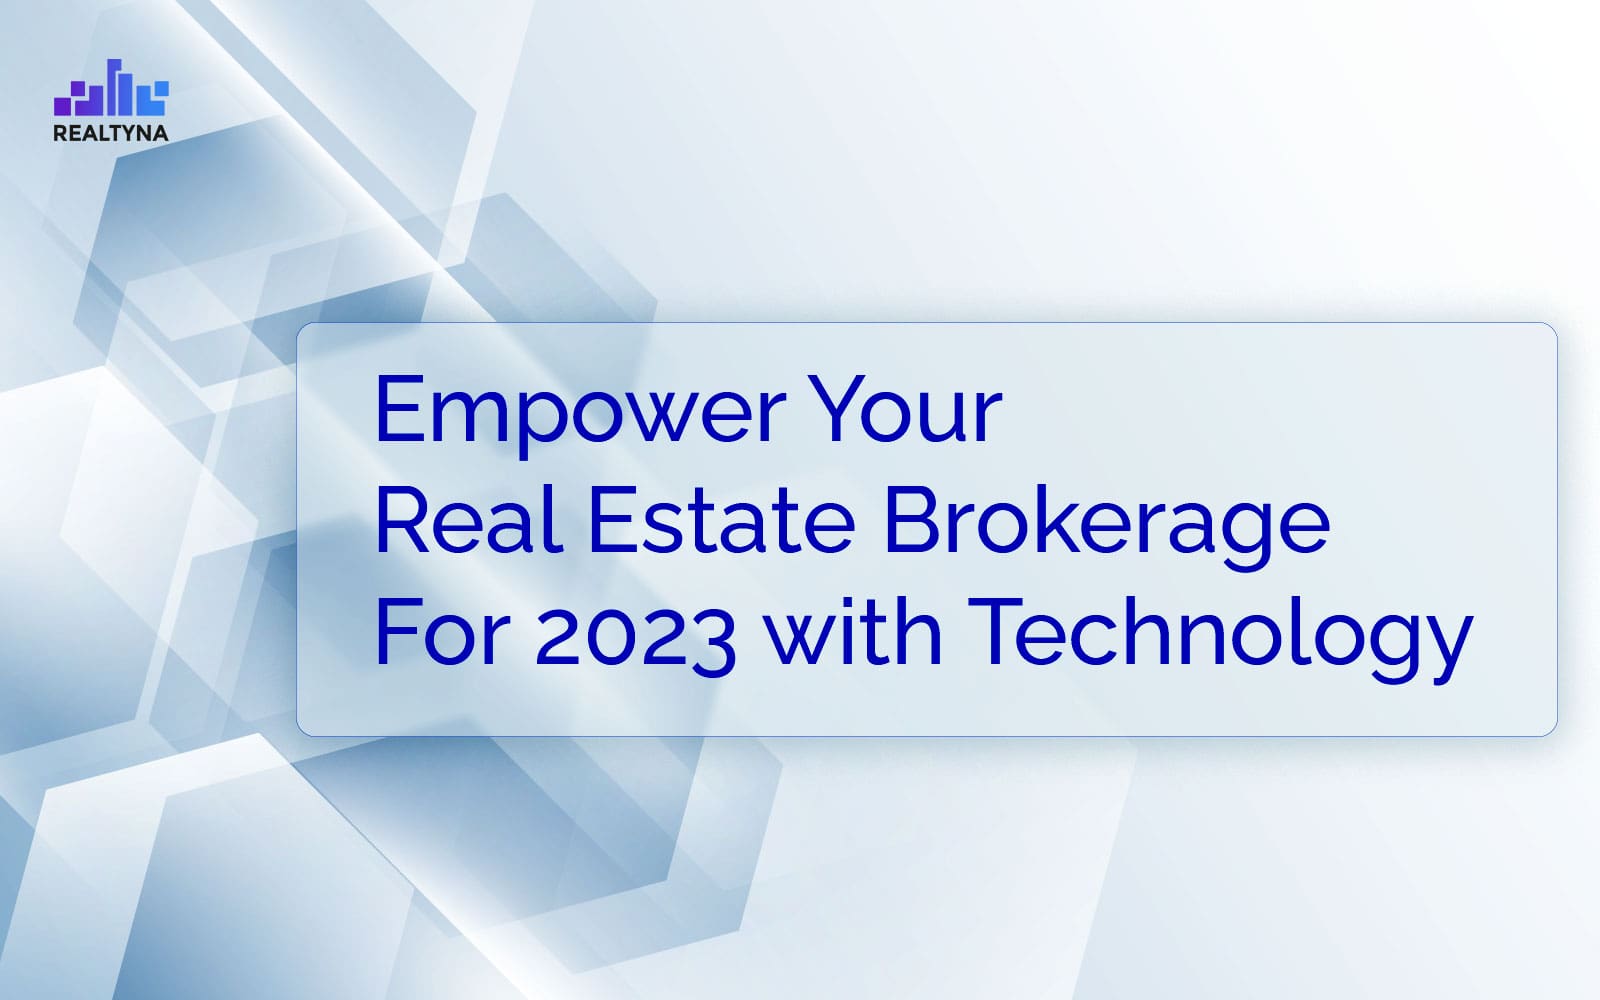 Real estate technology